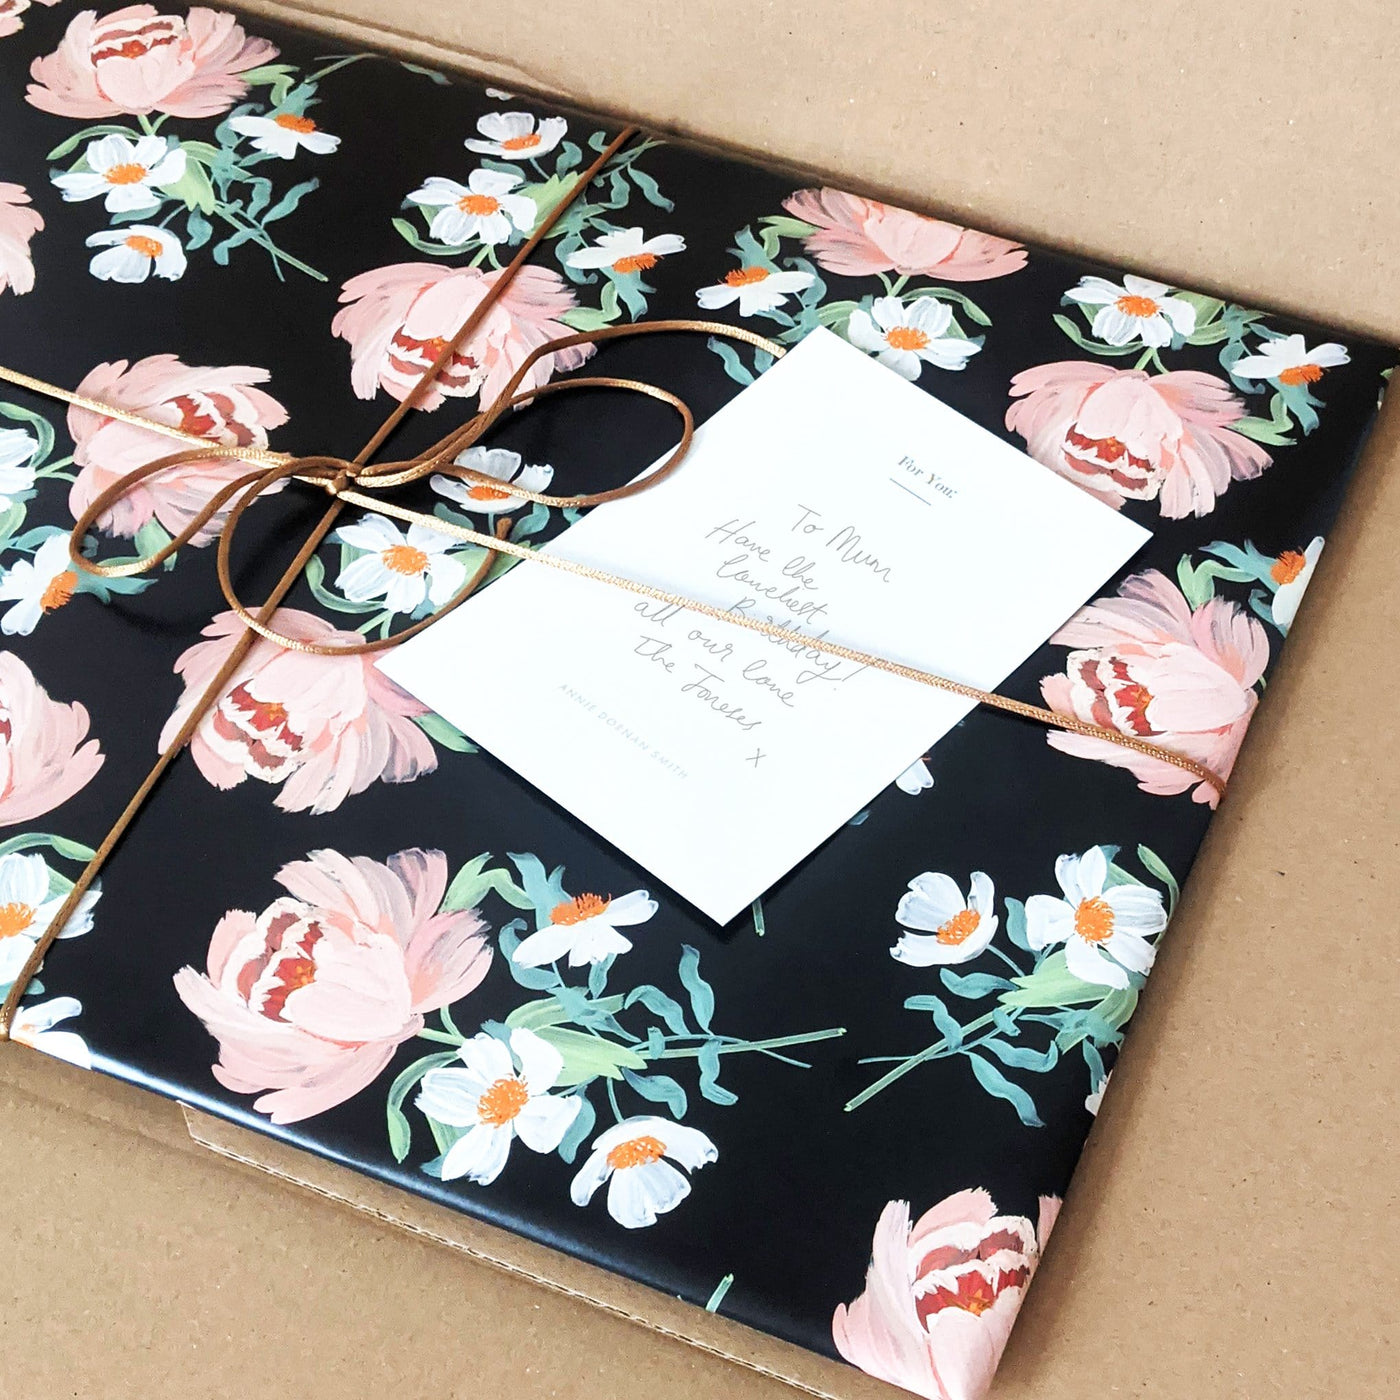 Wrapped Present In Black Floral Paper With Brown String - Annie Dornan Smith